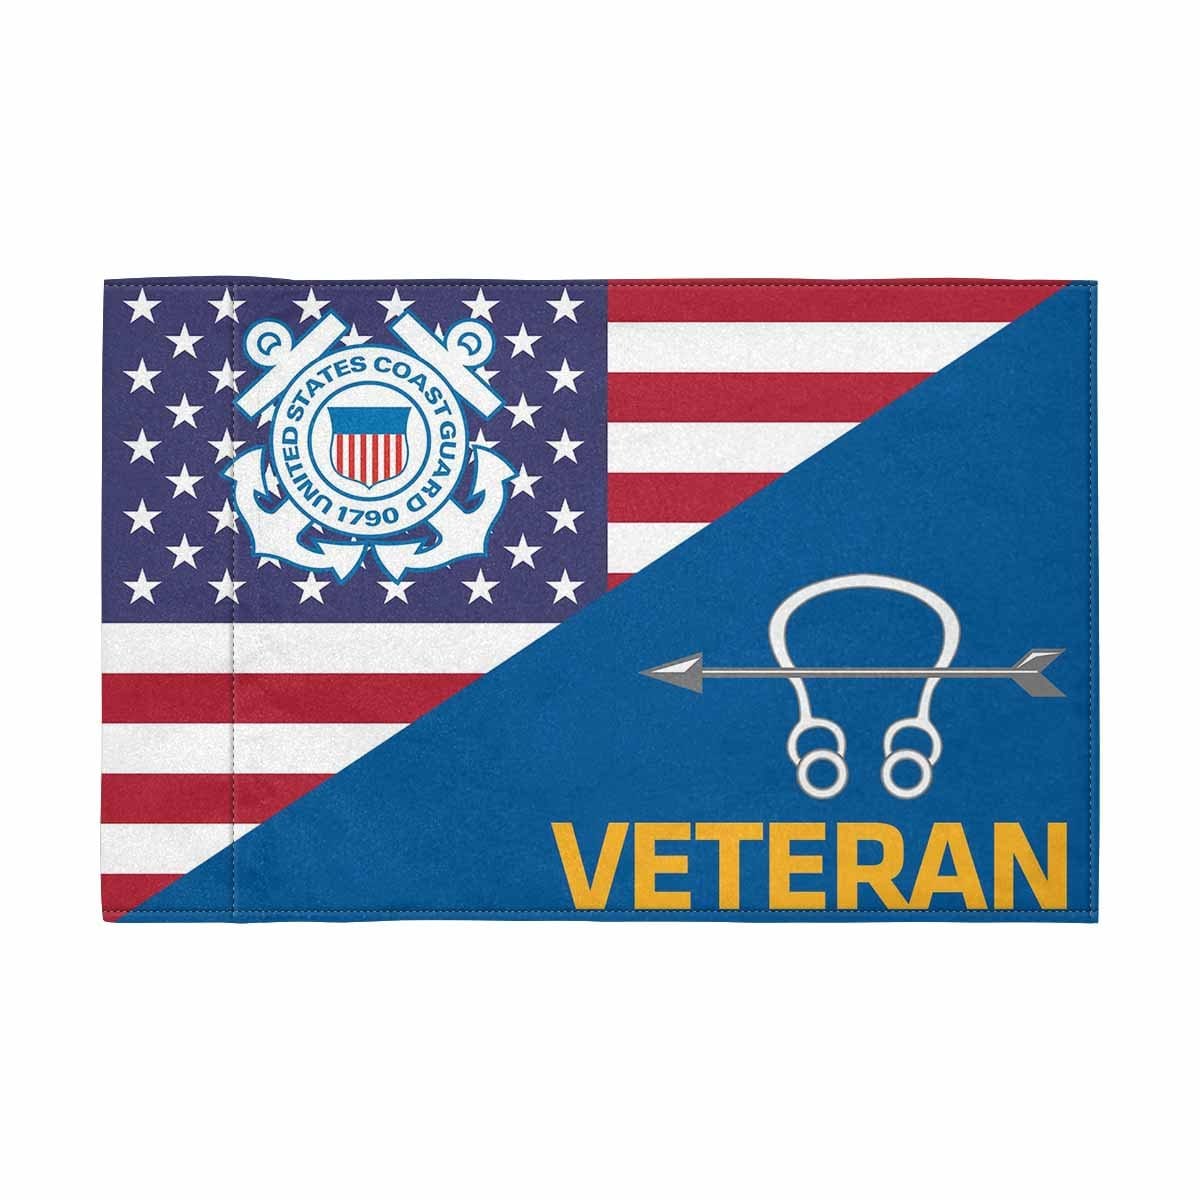 USCG ST Veteran Motorcycle Flag 9" x 6" Twin-Side Printing D01-MotorcycleFlag-USCG-Veterans Nation